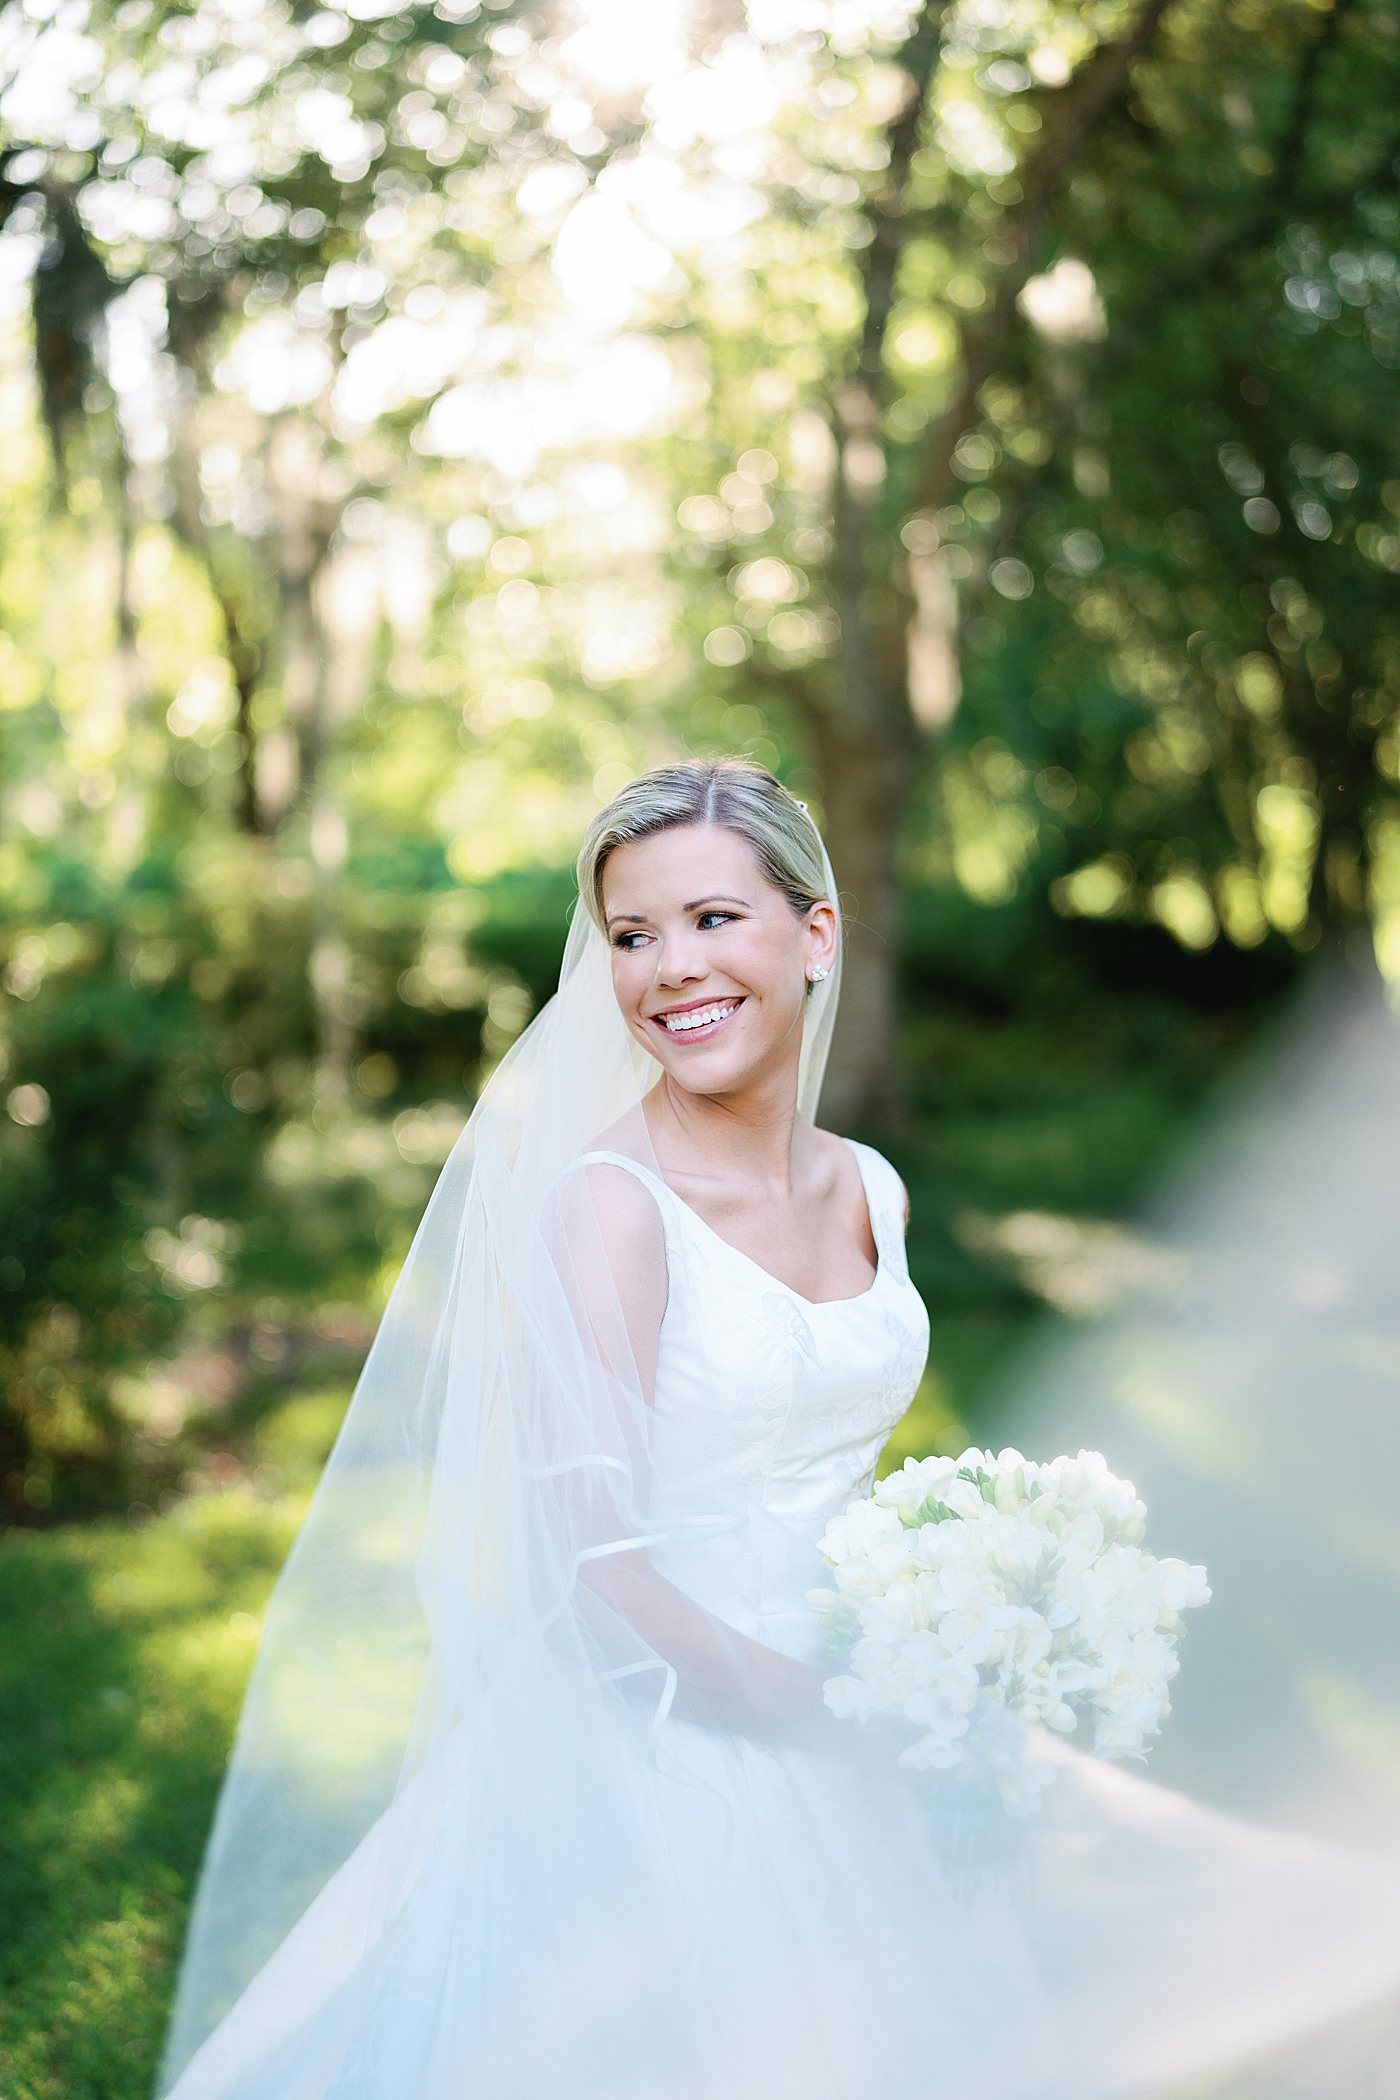 Bride in a veil standing on a porch surrounded by greenery | Image by Annie Laura Photo